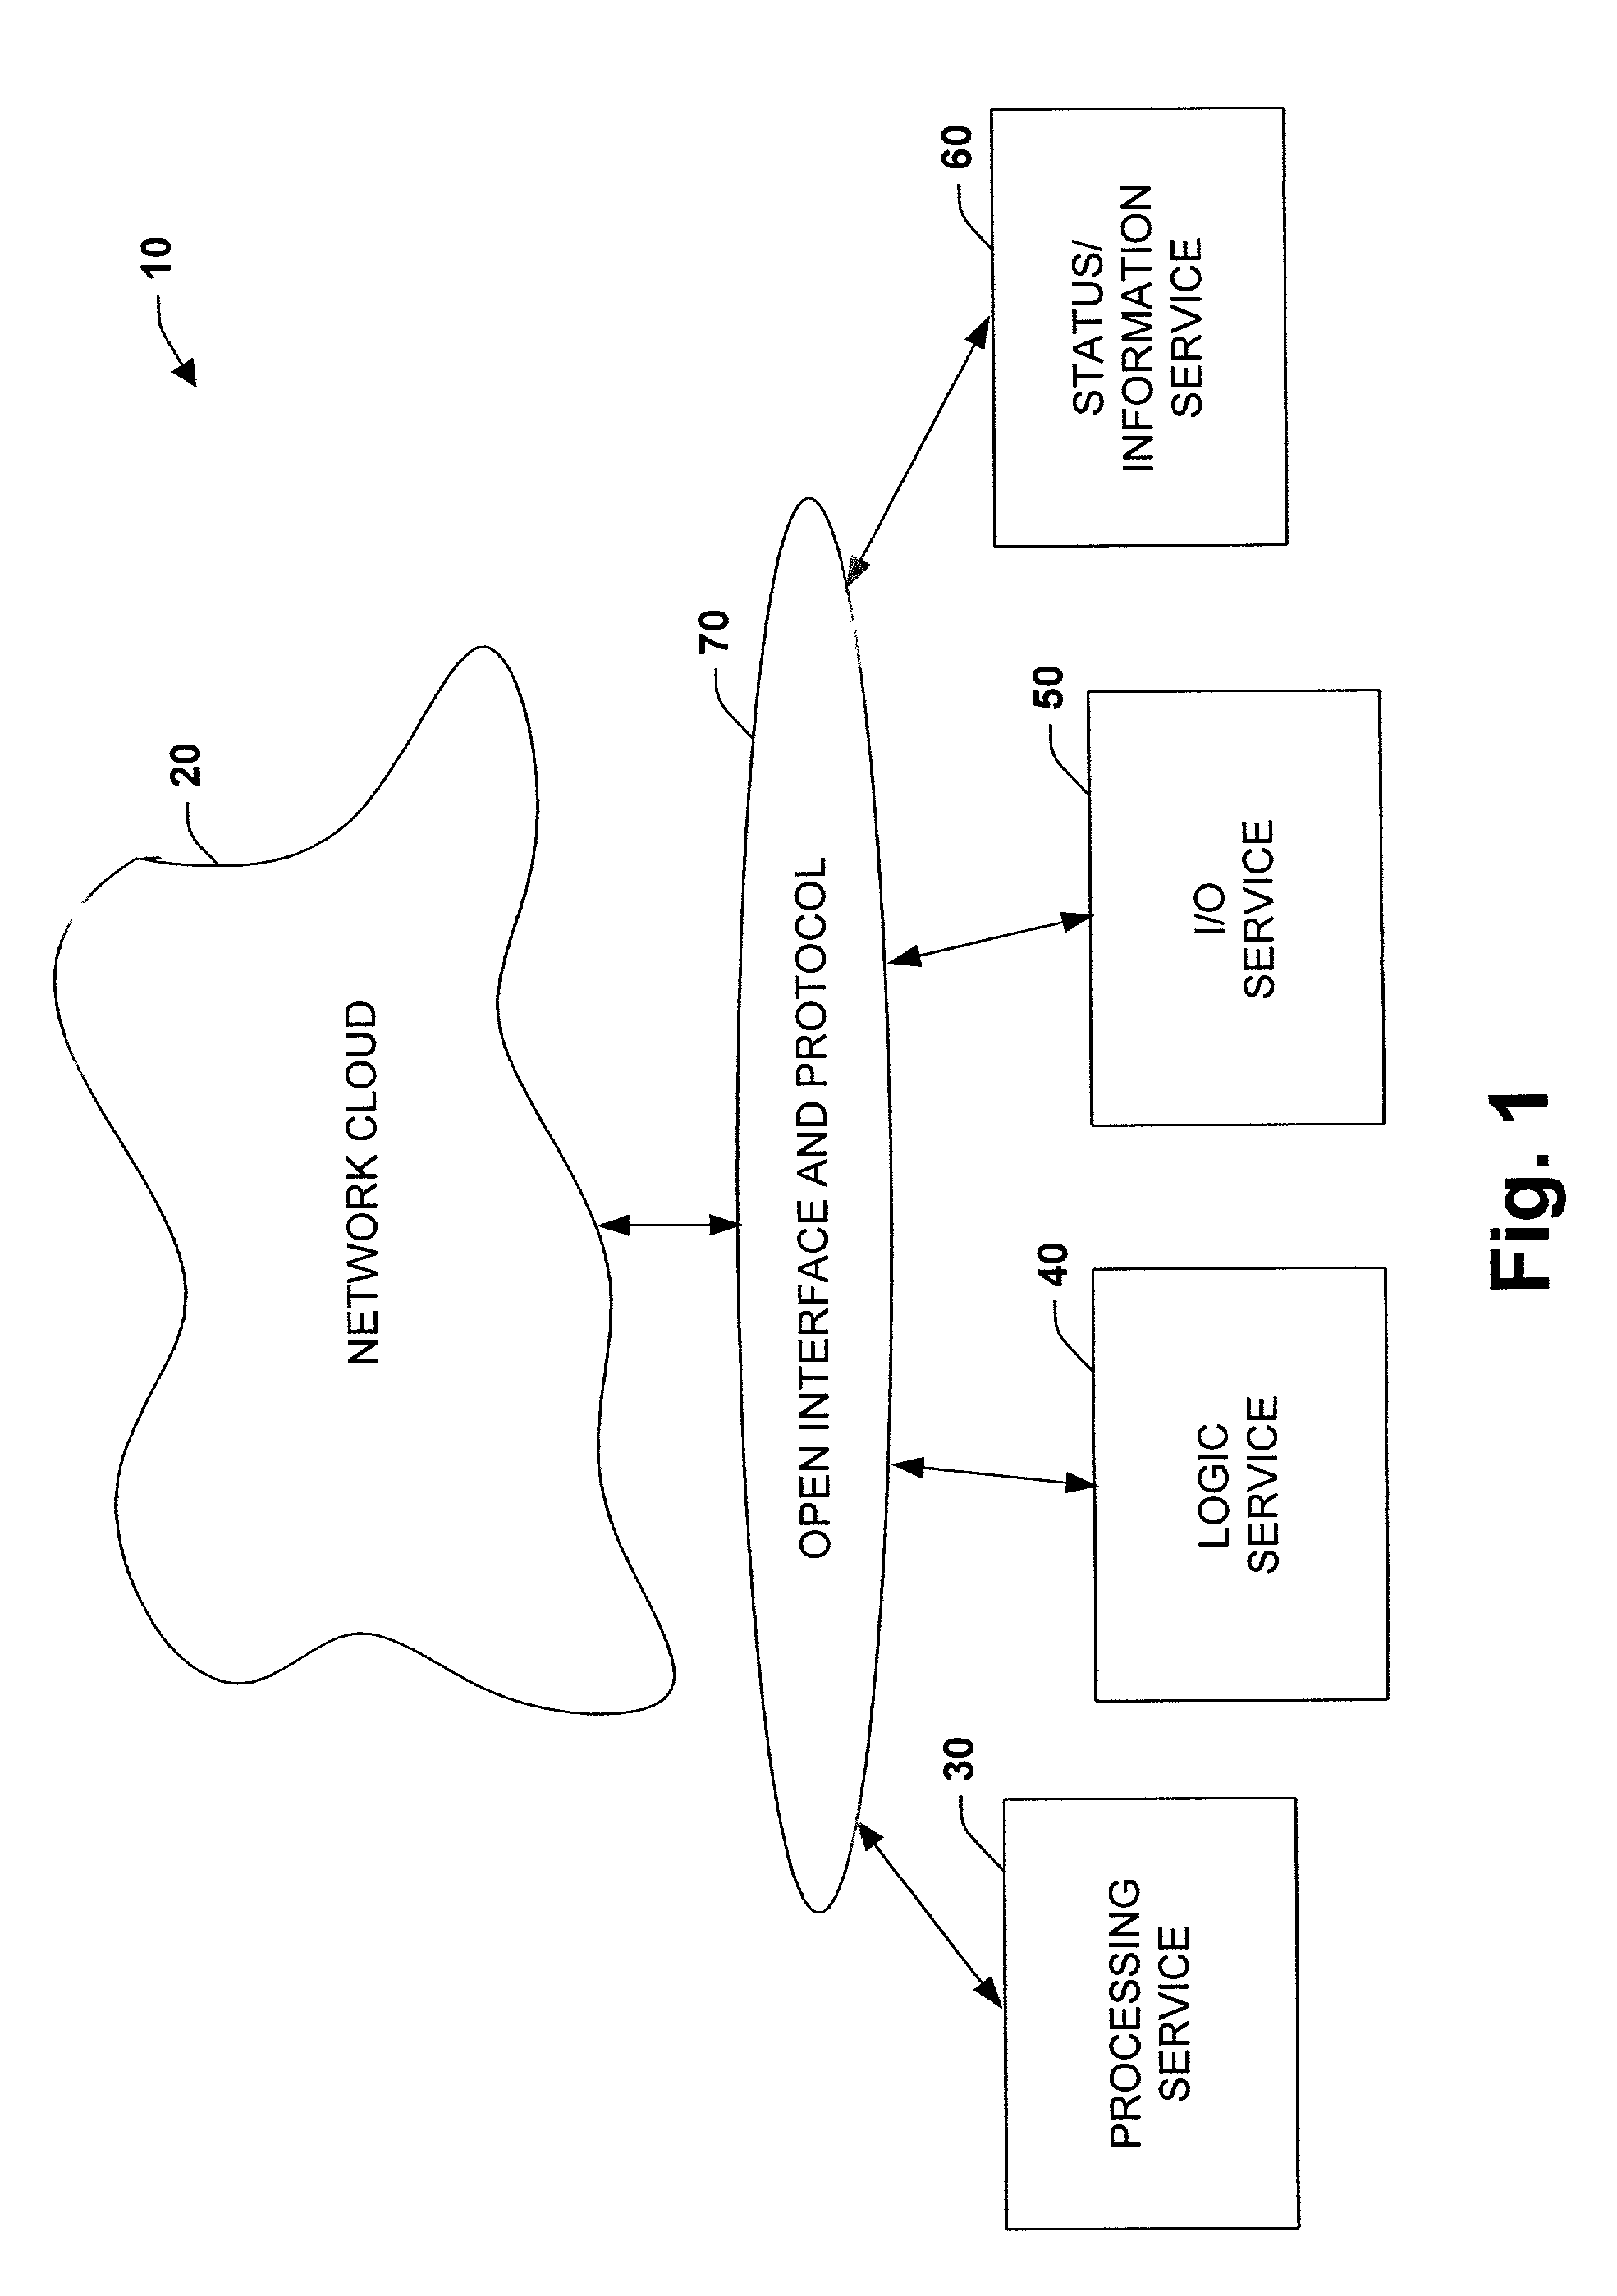 System and methodology providing open interface and distributed processing in an industrial controller environment